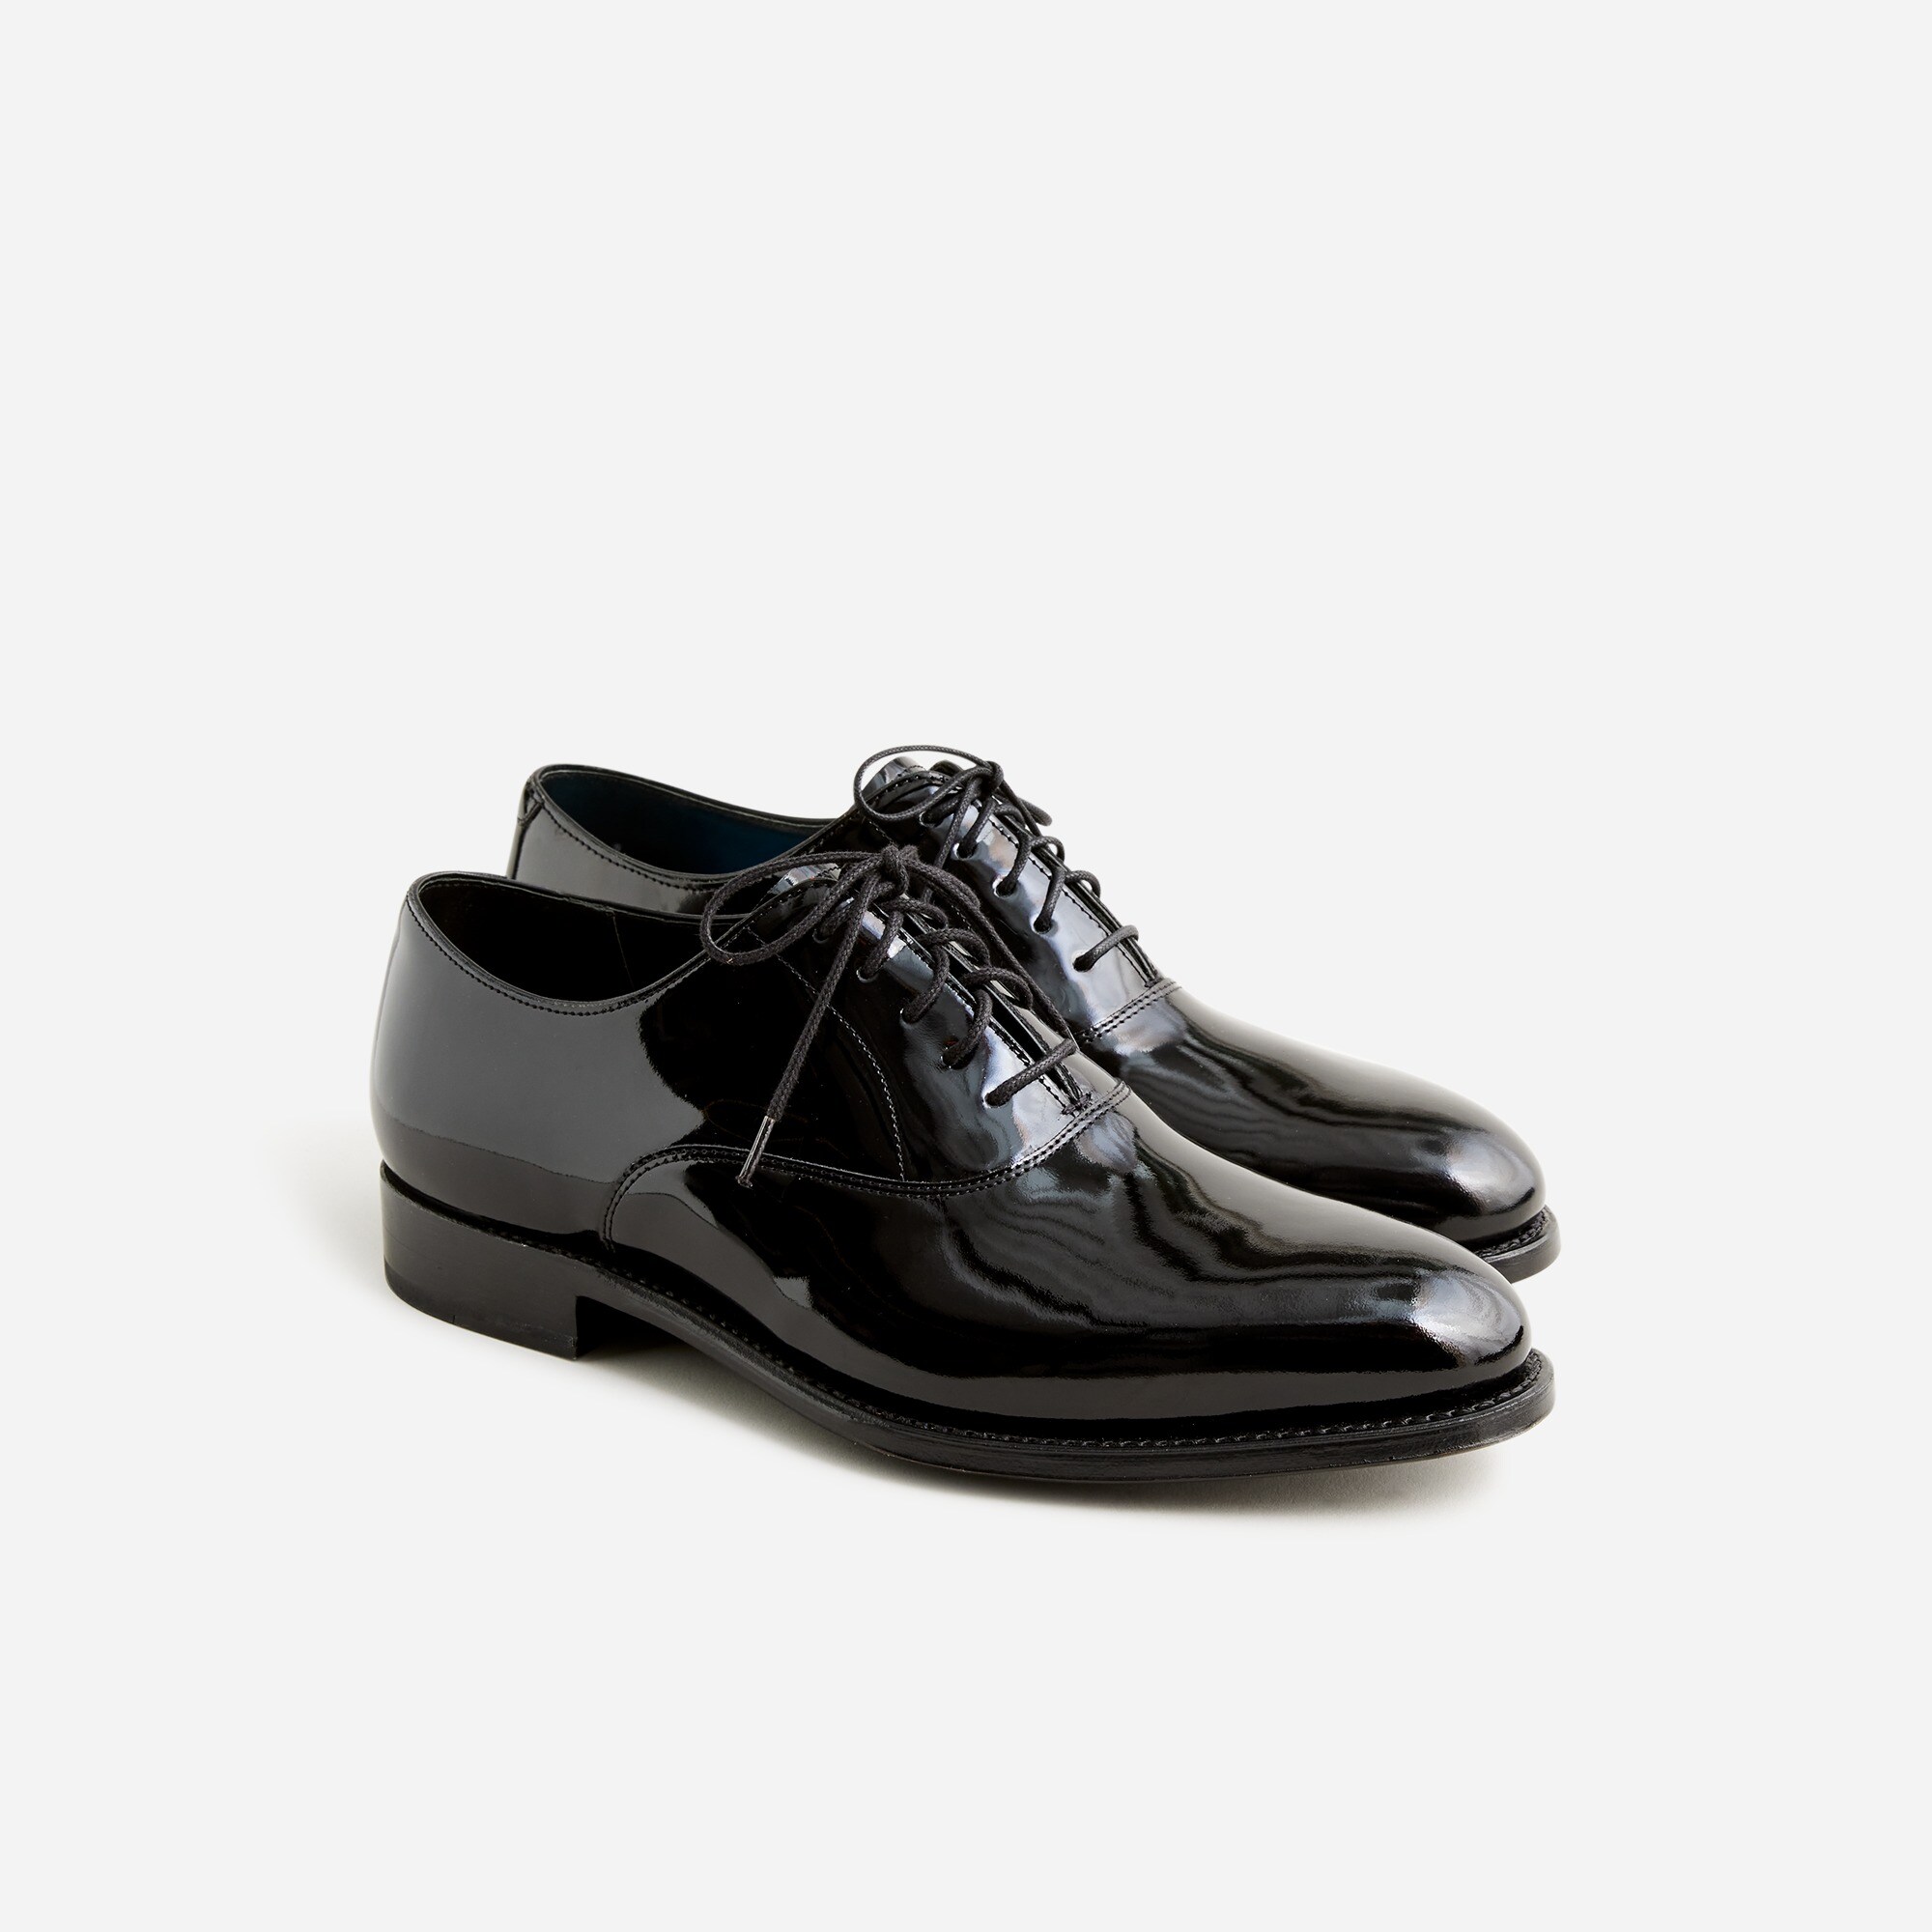 mens Ludlow tuxedo oxfords in patent leather